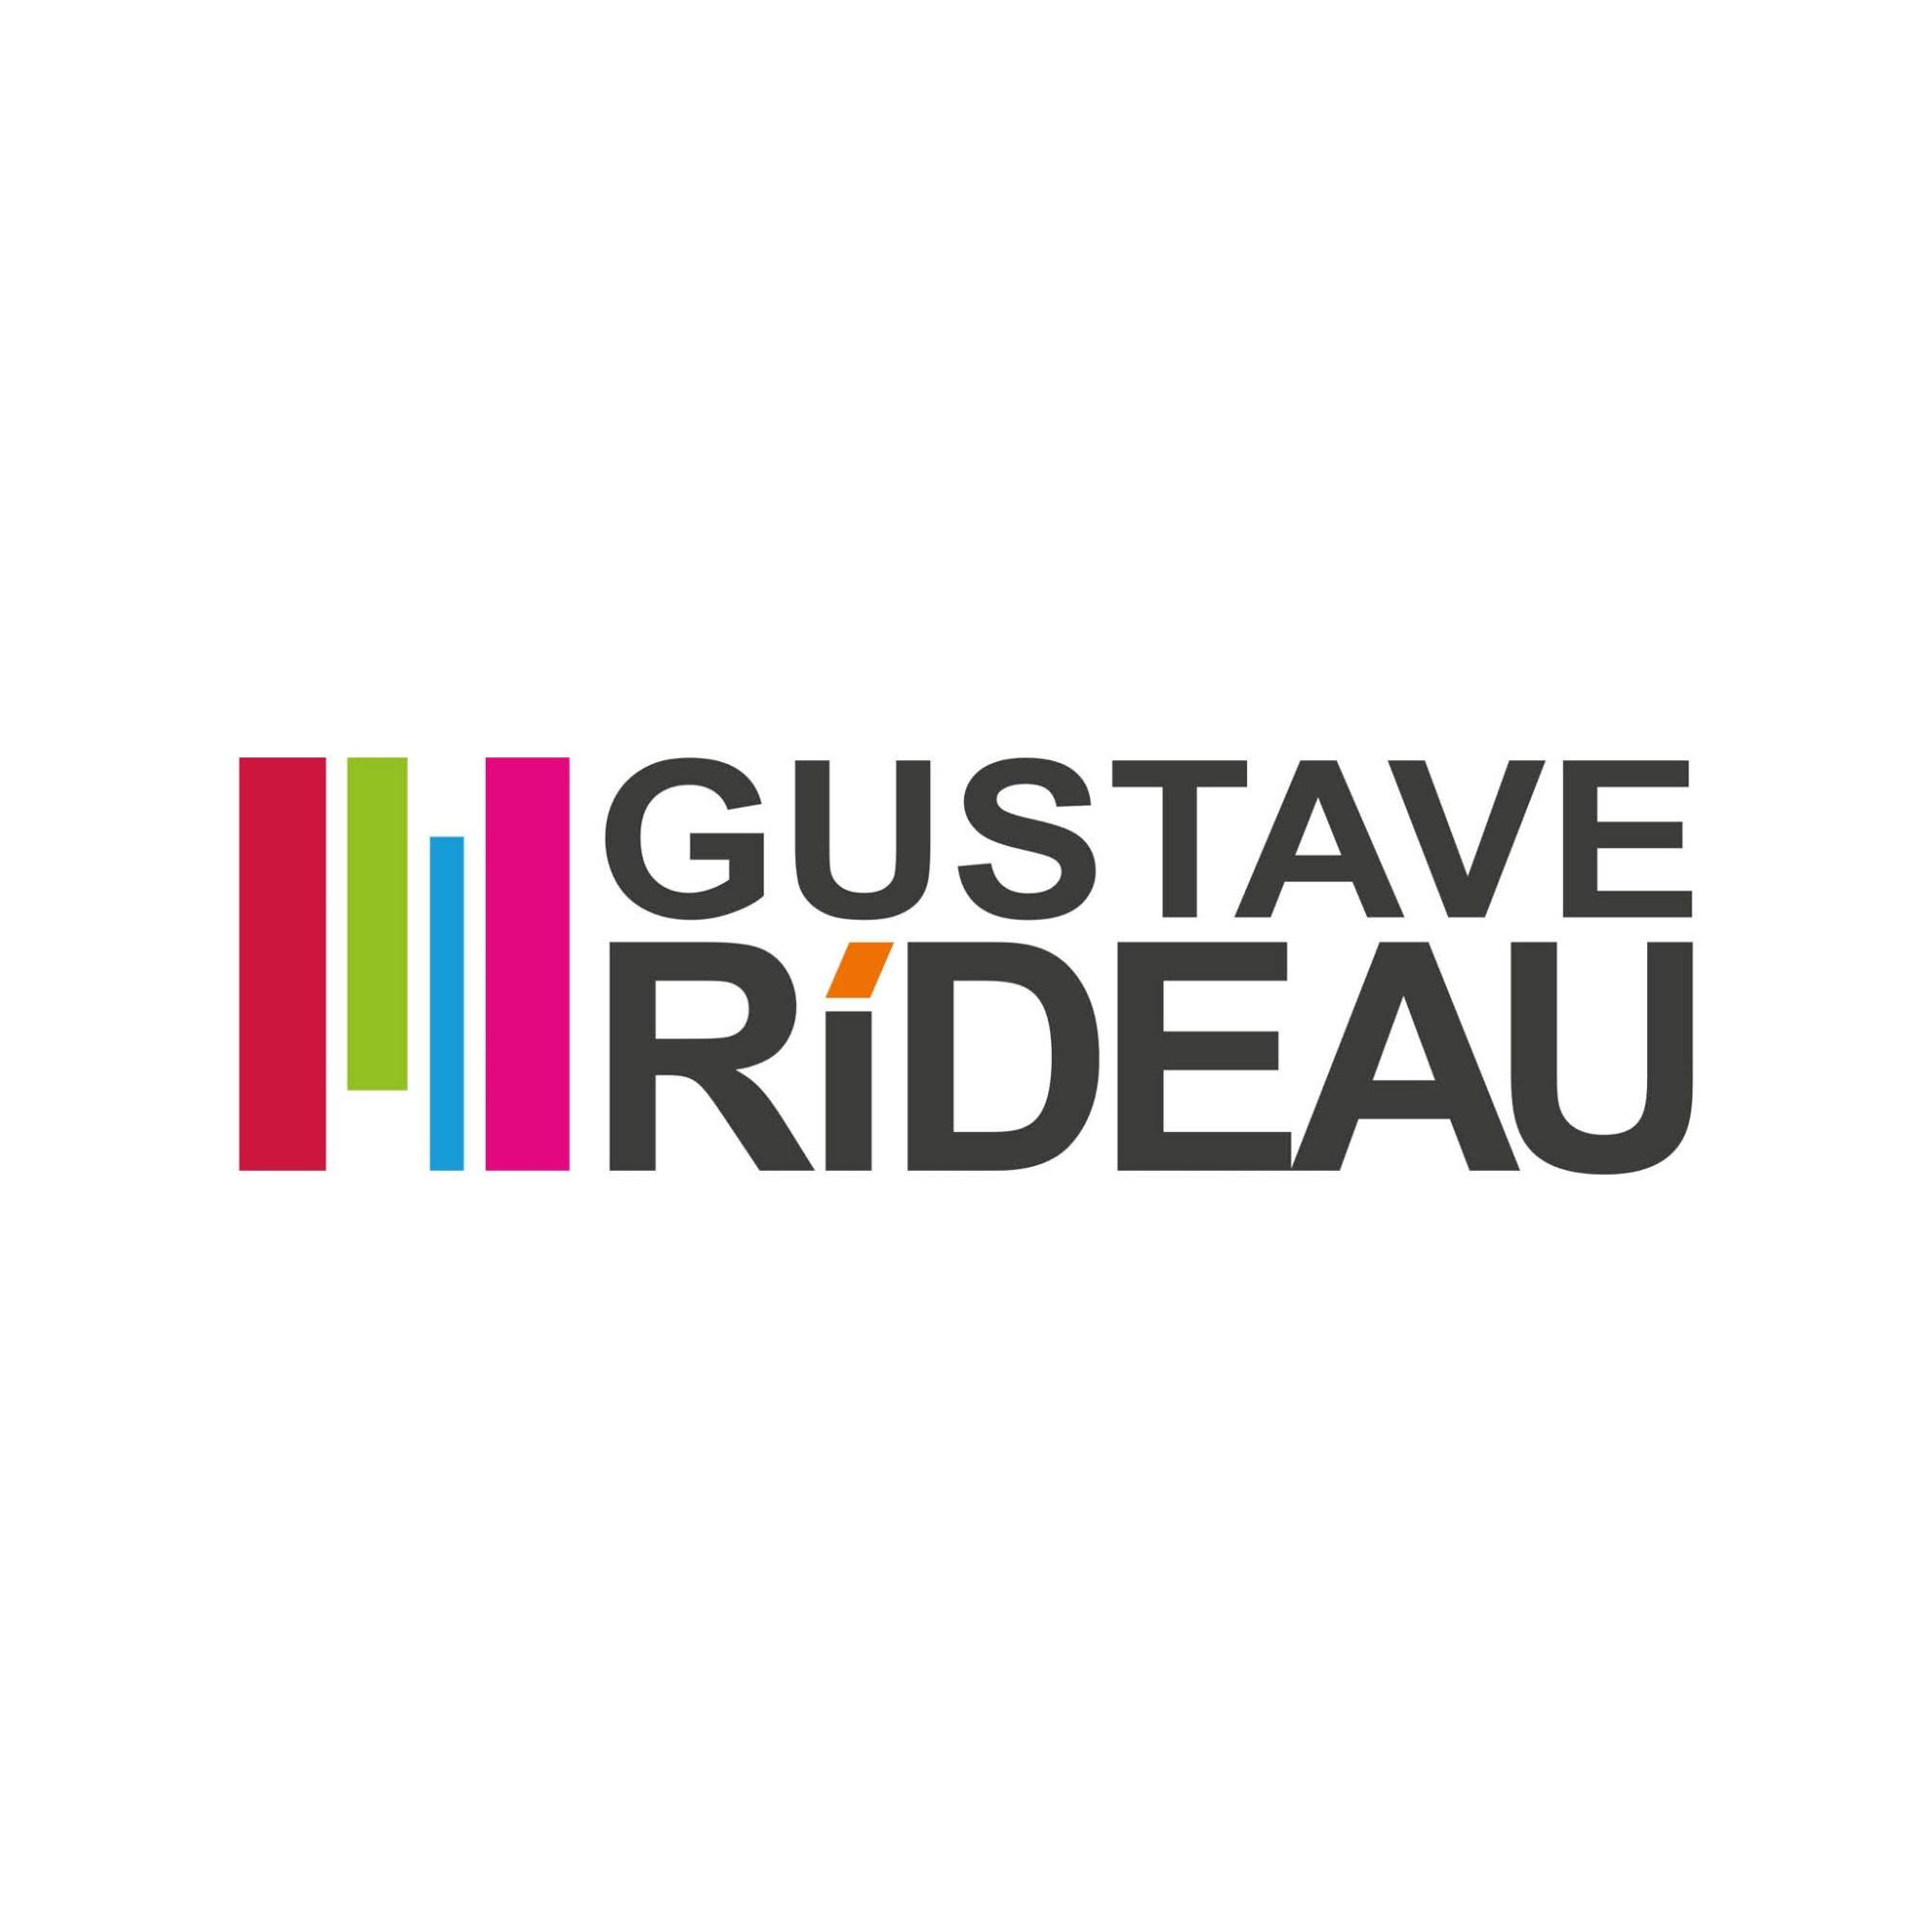 Gustave Rideau Toulouse